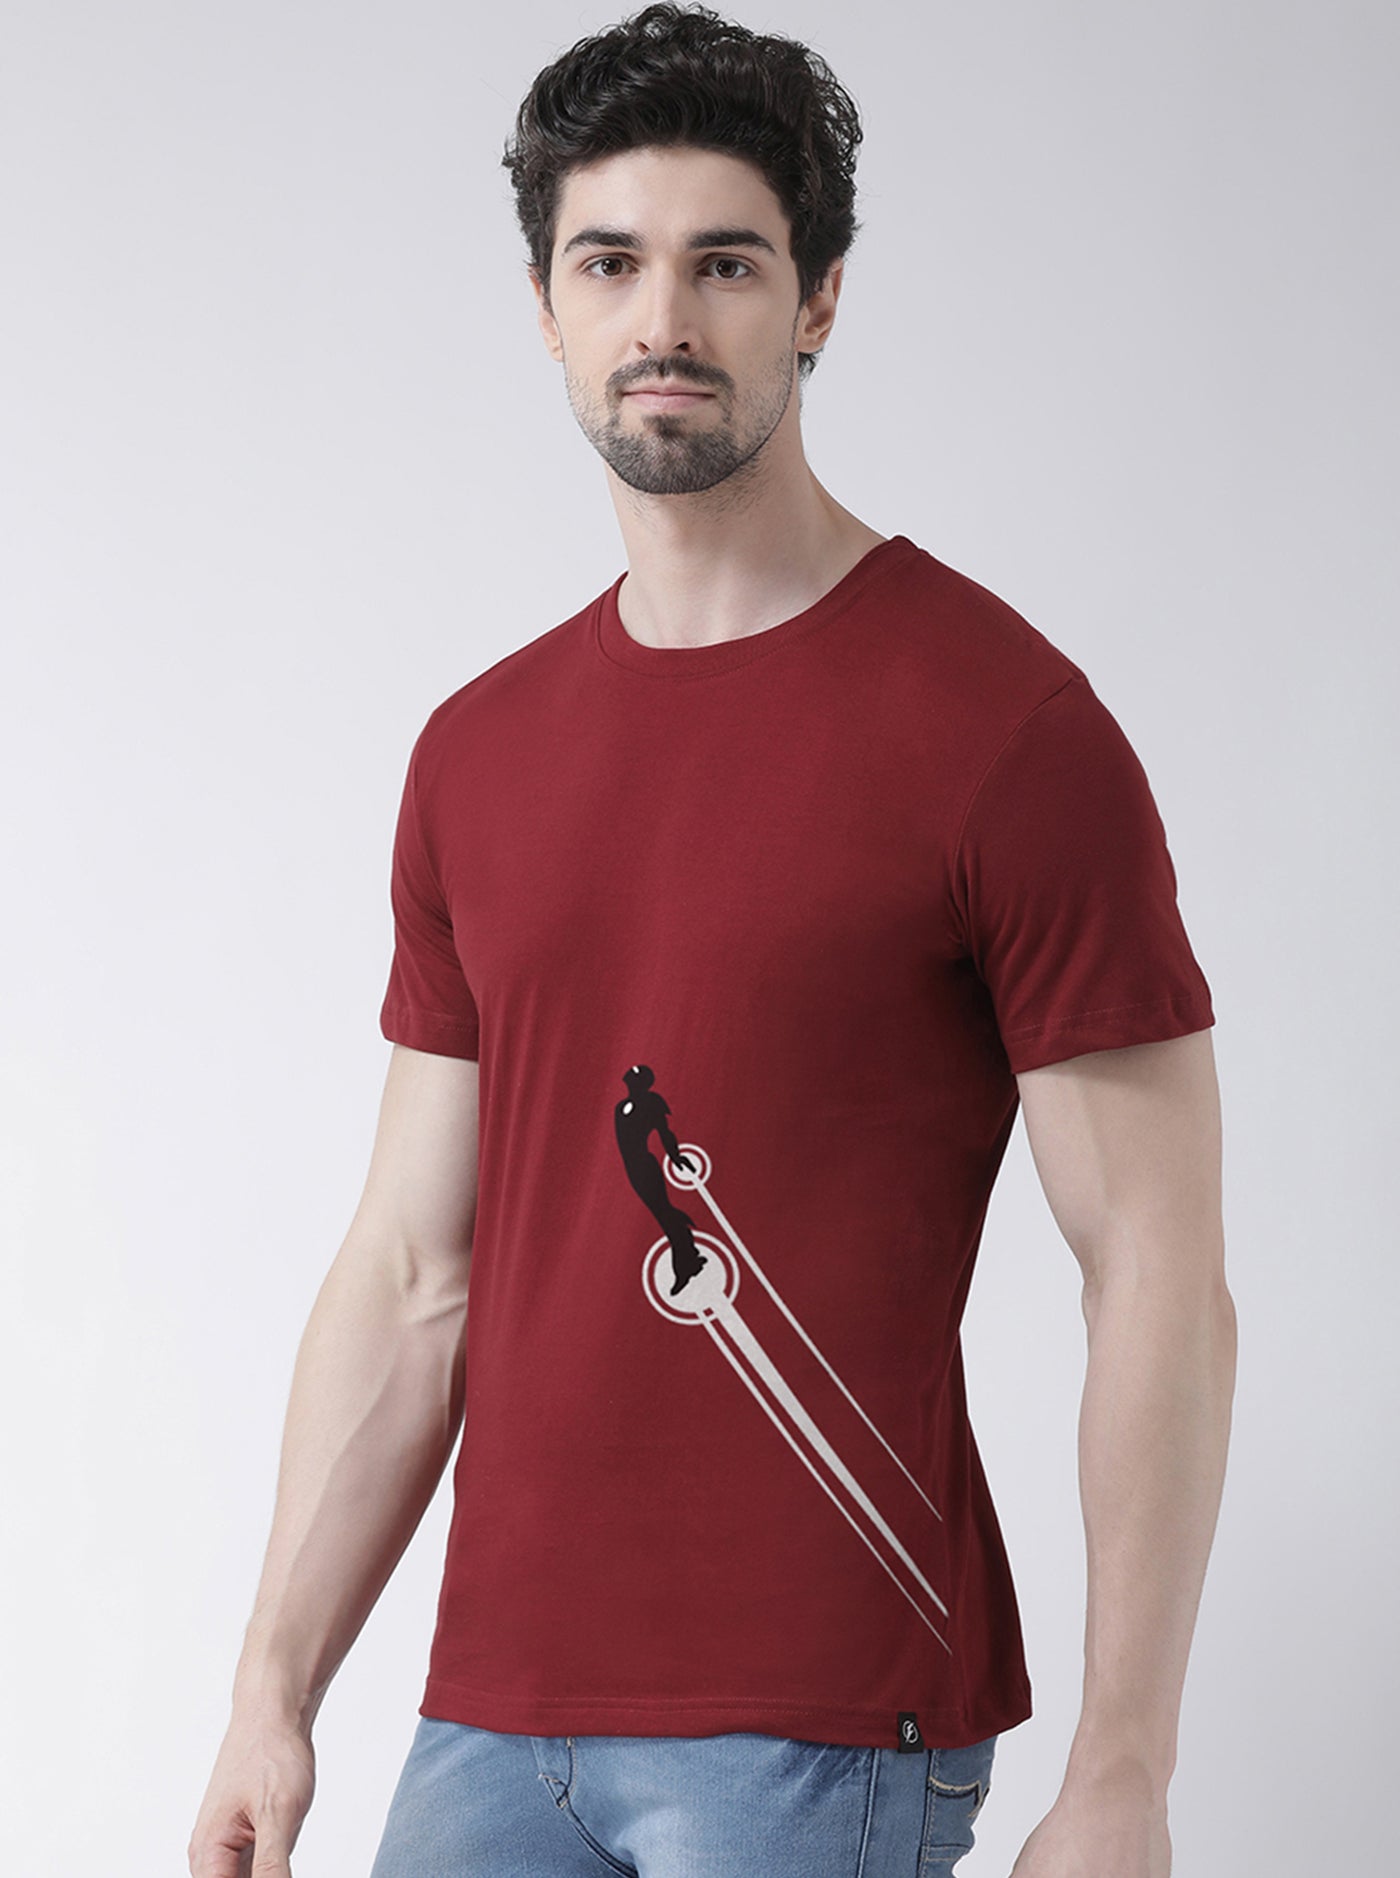 Iron Man Printed Round Neck T-Shirt - Friskers